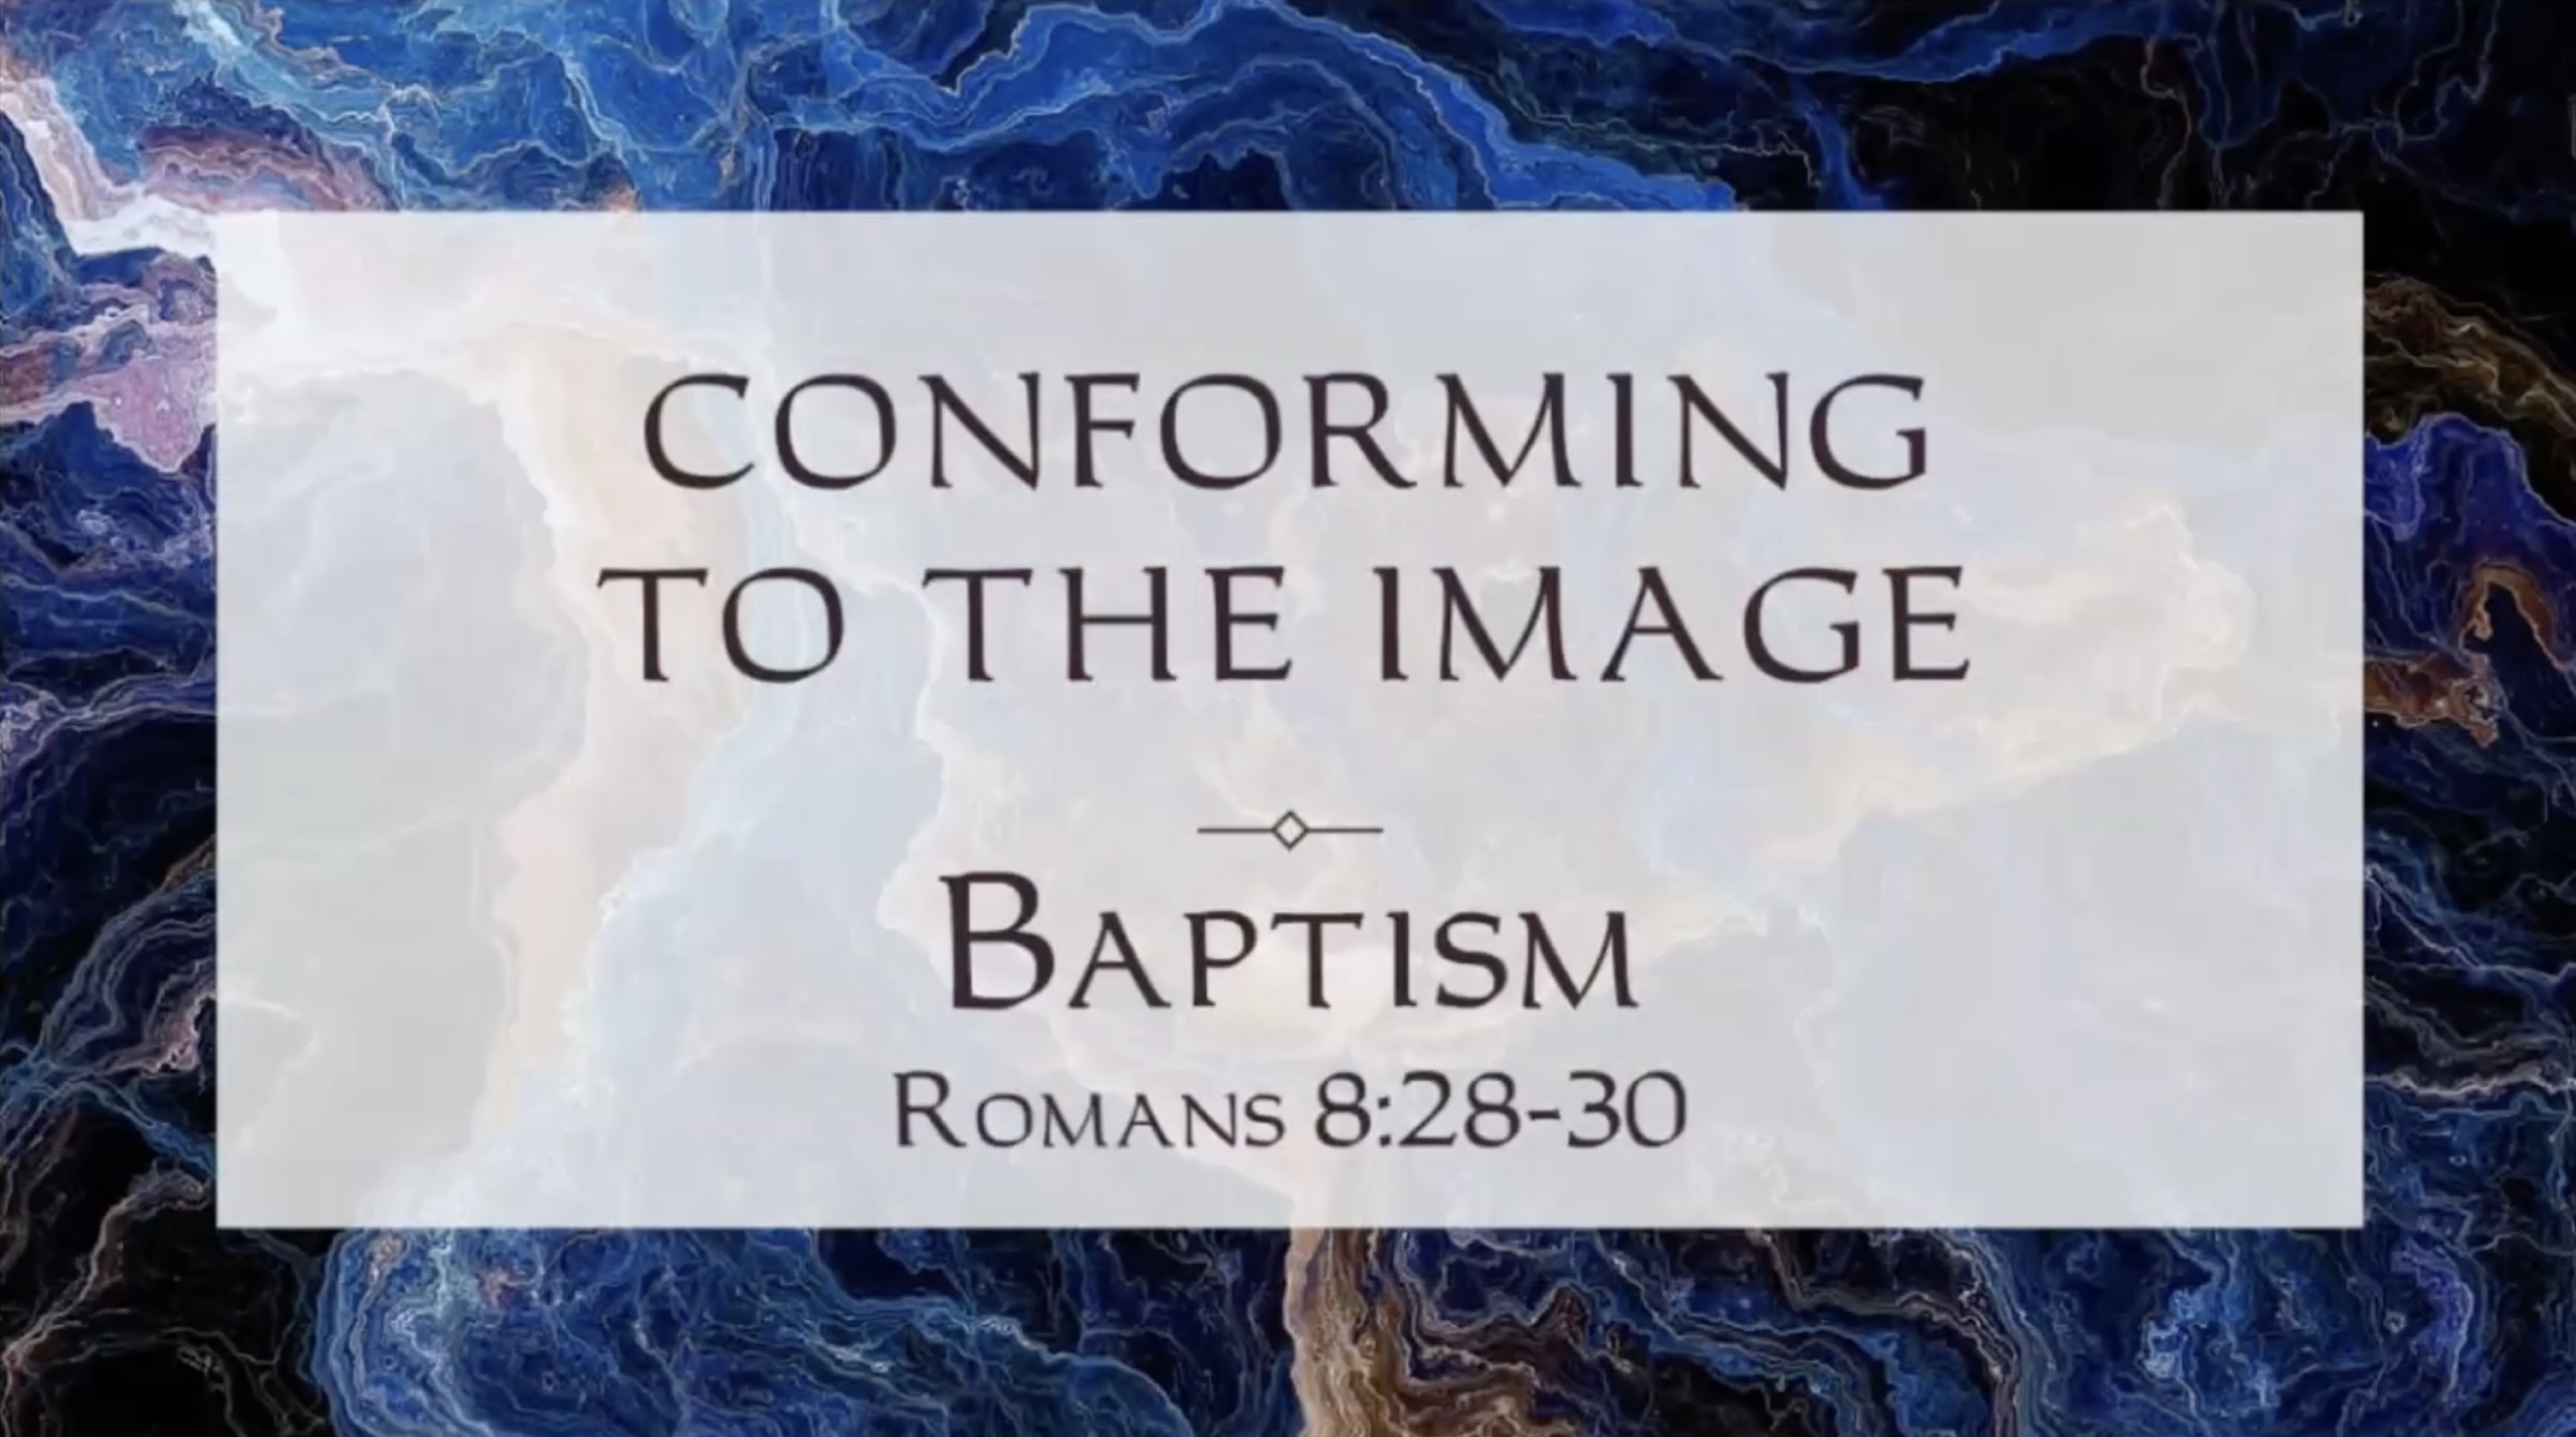 Conforming to the Image - Baptism